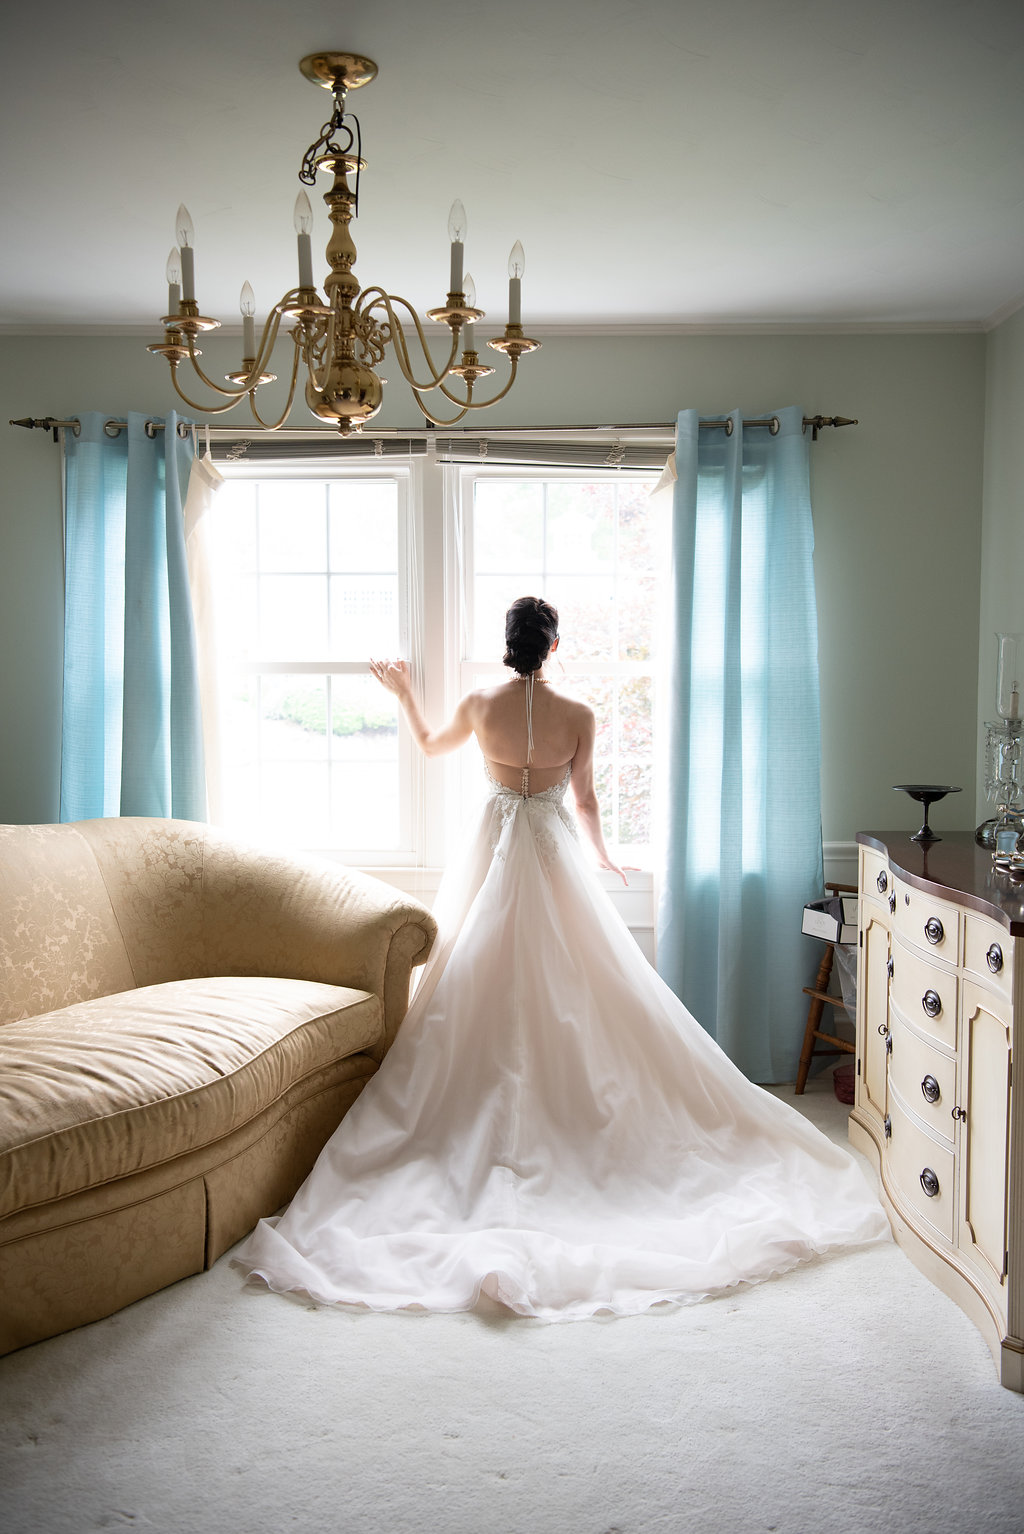 Bride looking out window of bright and airy bridal suite | tips for choosing a getting ready space